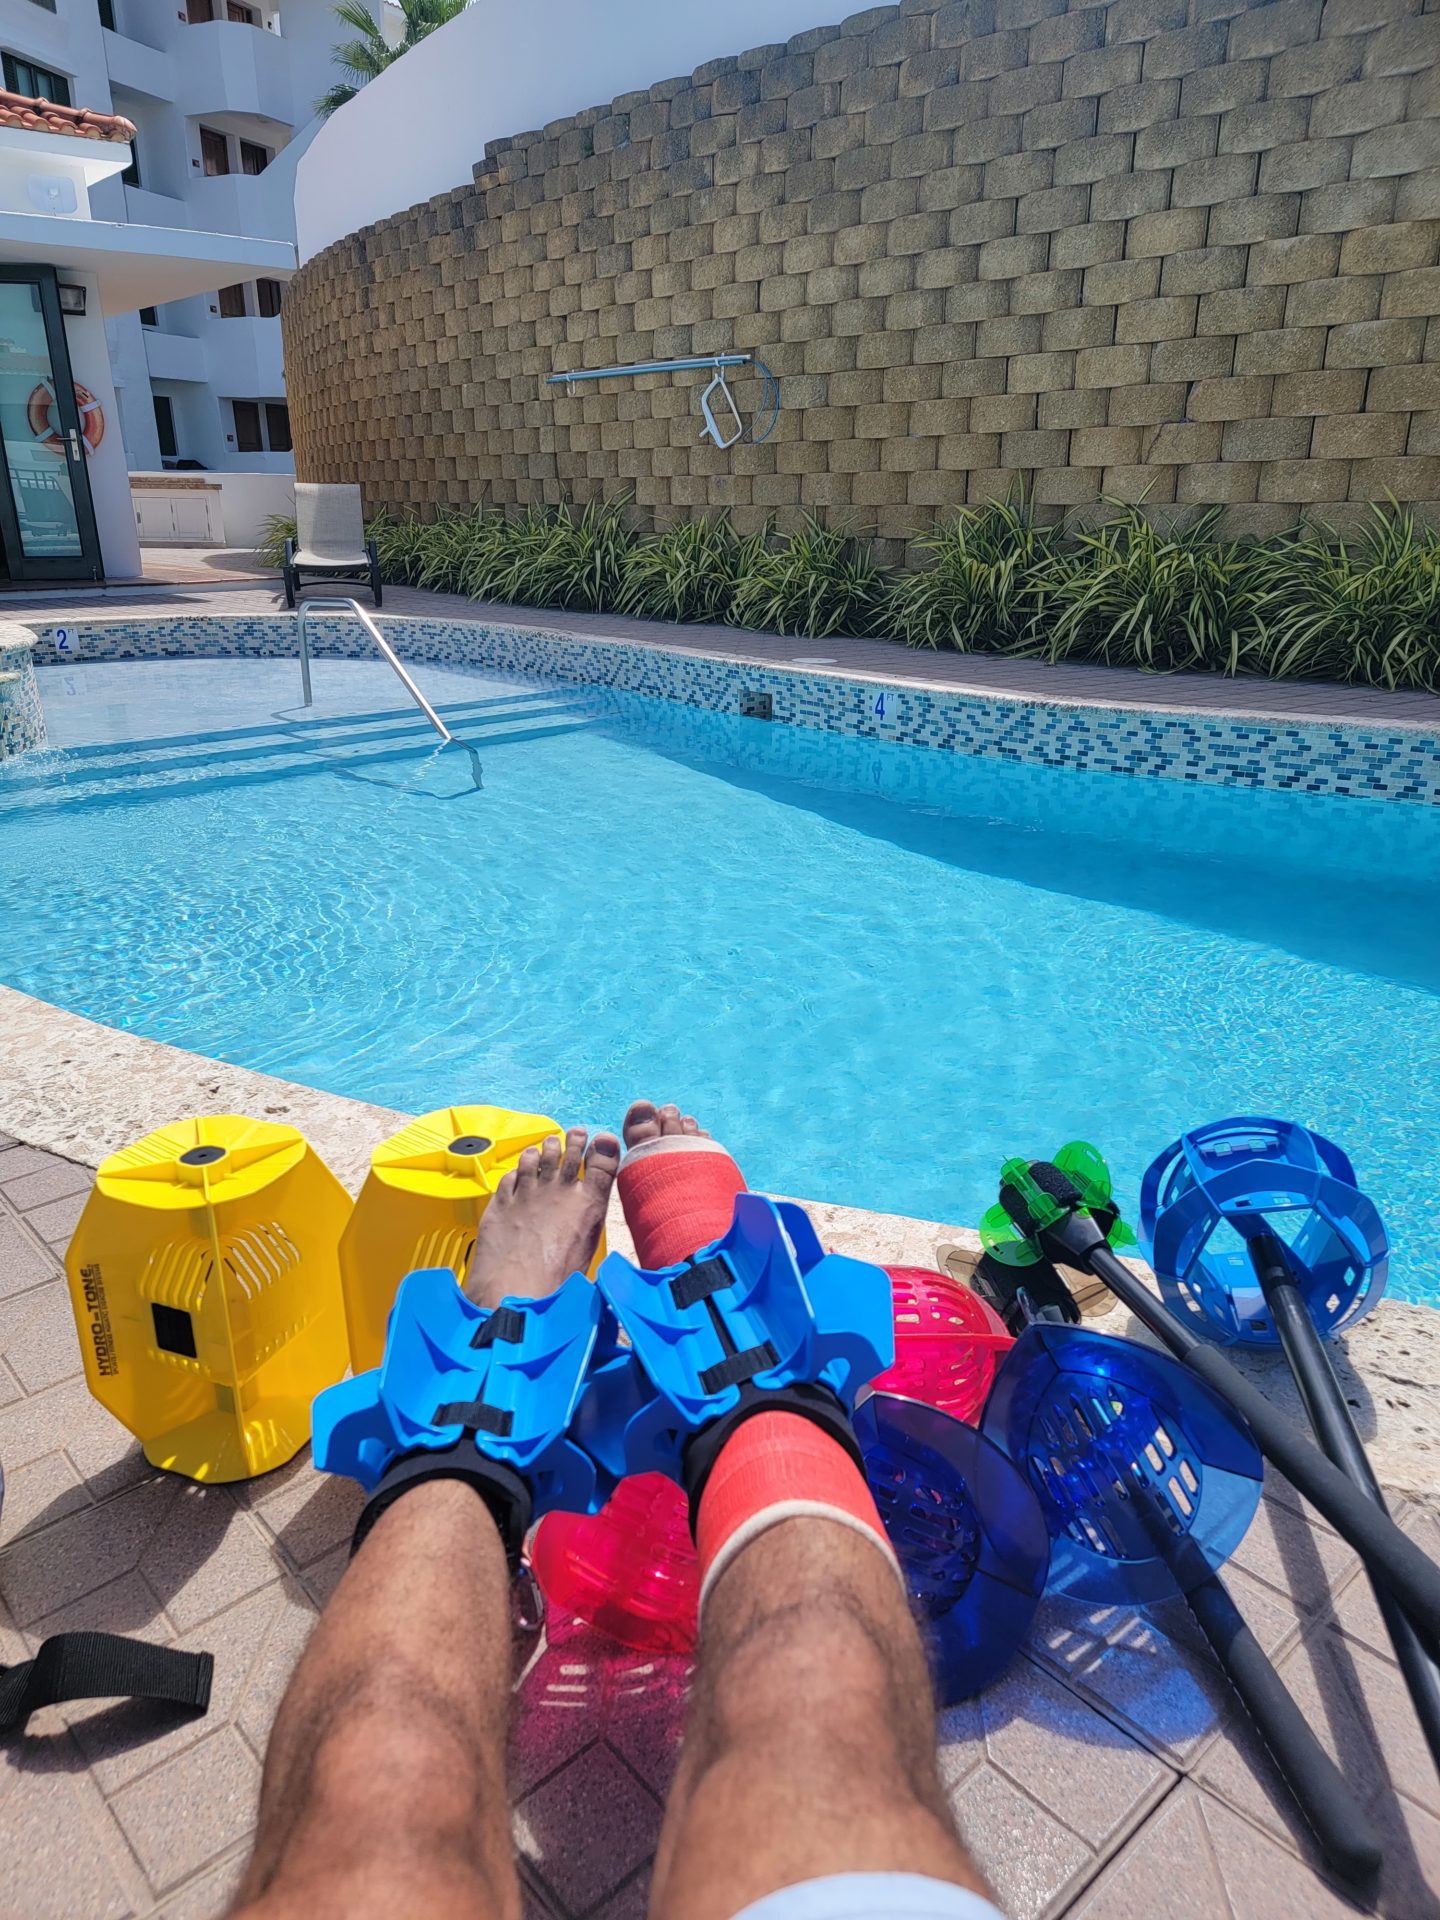 a person's feet with colorful objects next to a pool